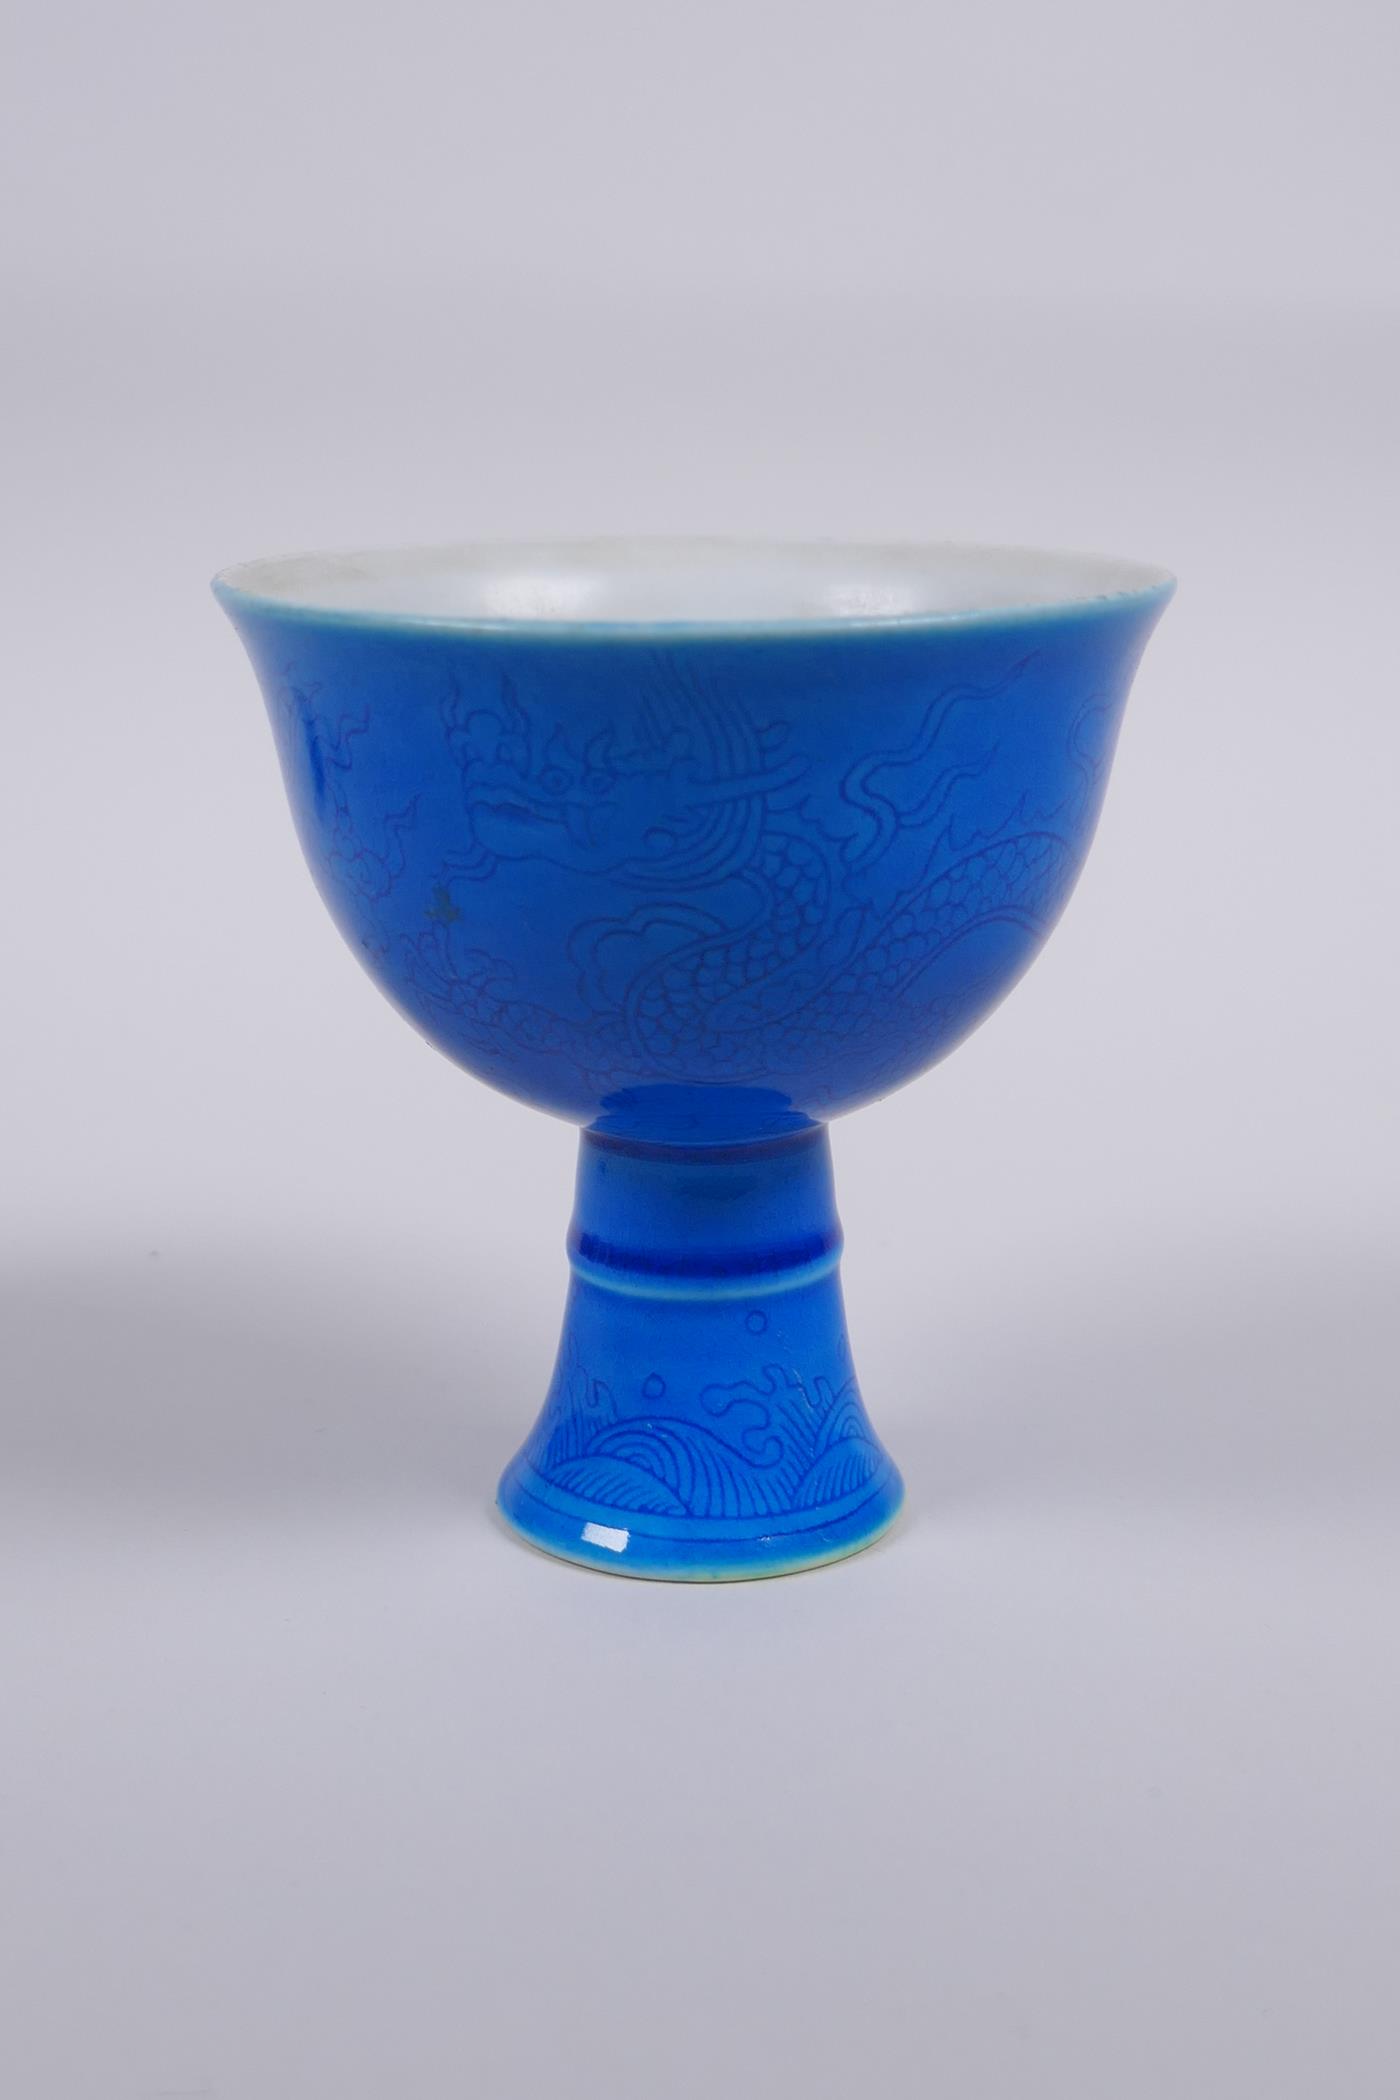 A blue glazed porcelain stem cup with incised dragon decoration, Chinese Chenghua 6 character mark